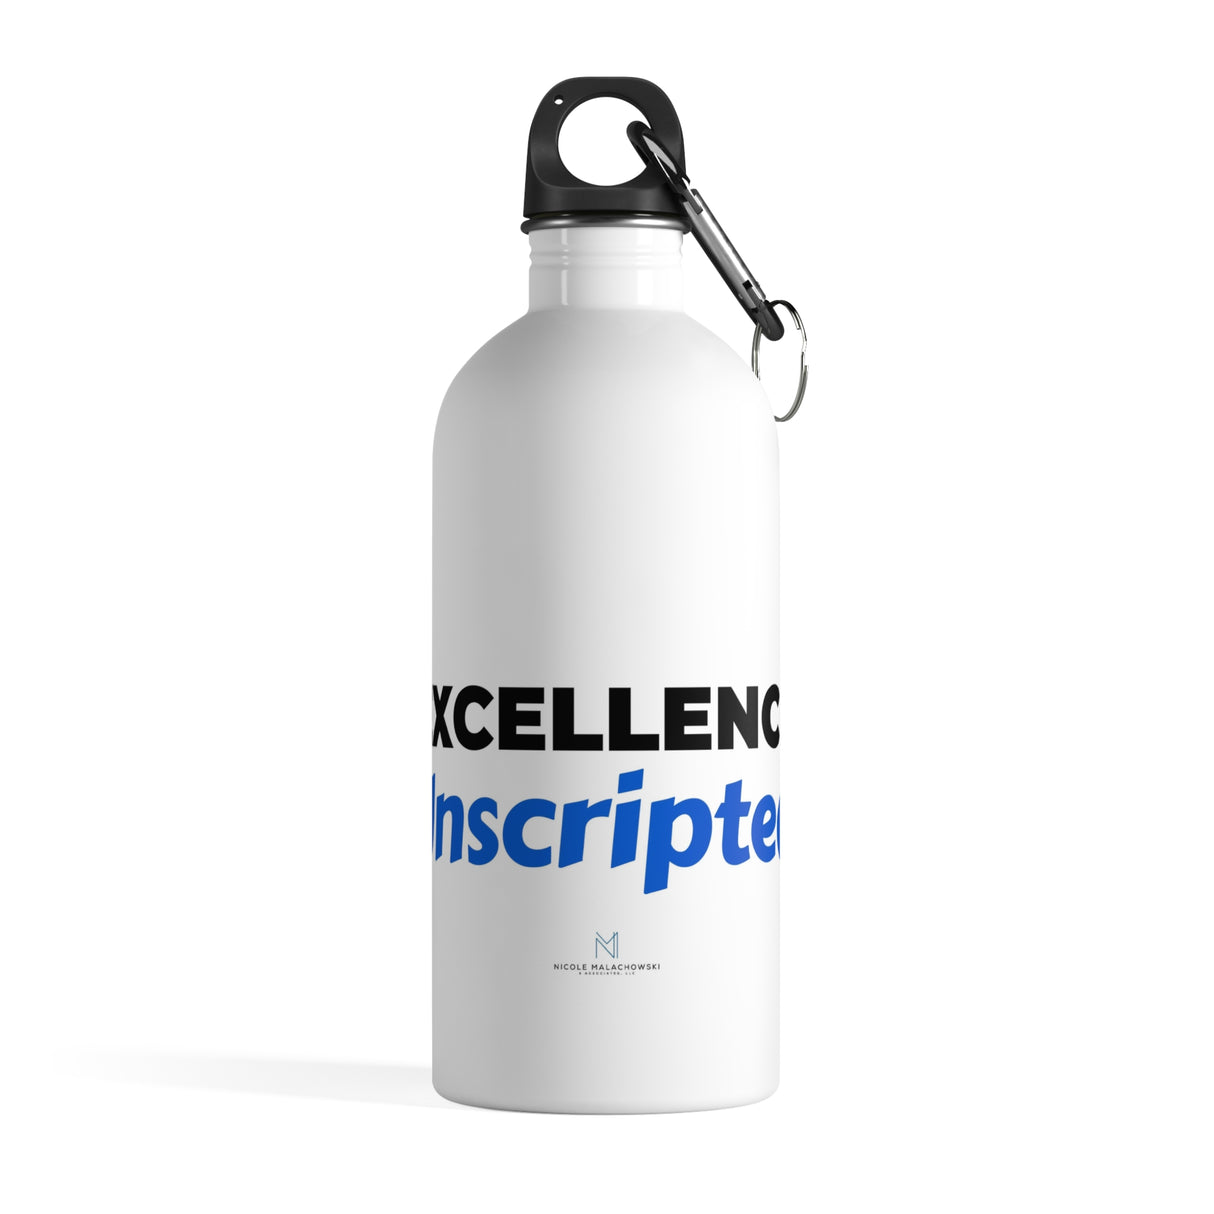 "Excellence Unscripted" Stainless Steel Water Bottle